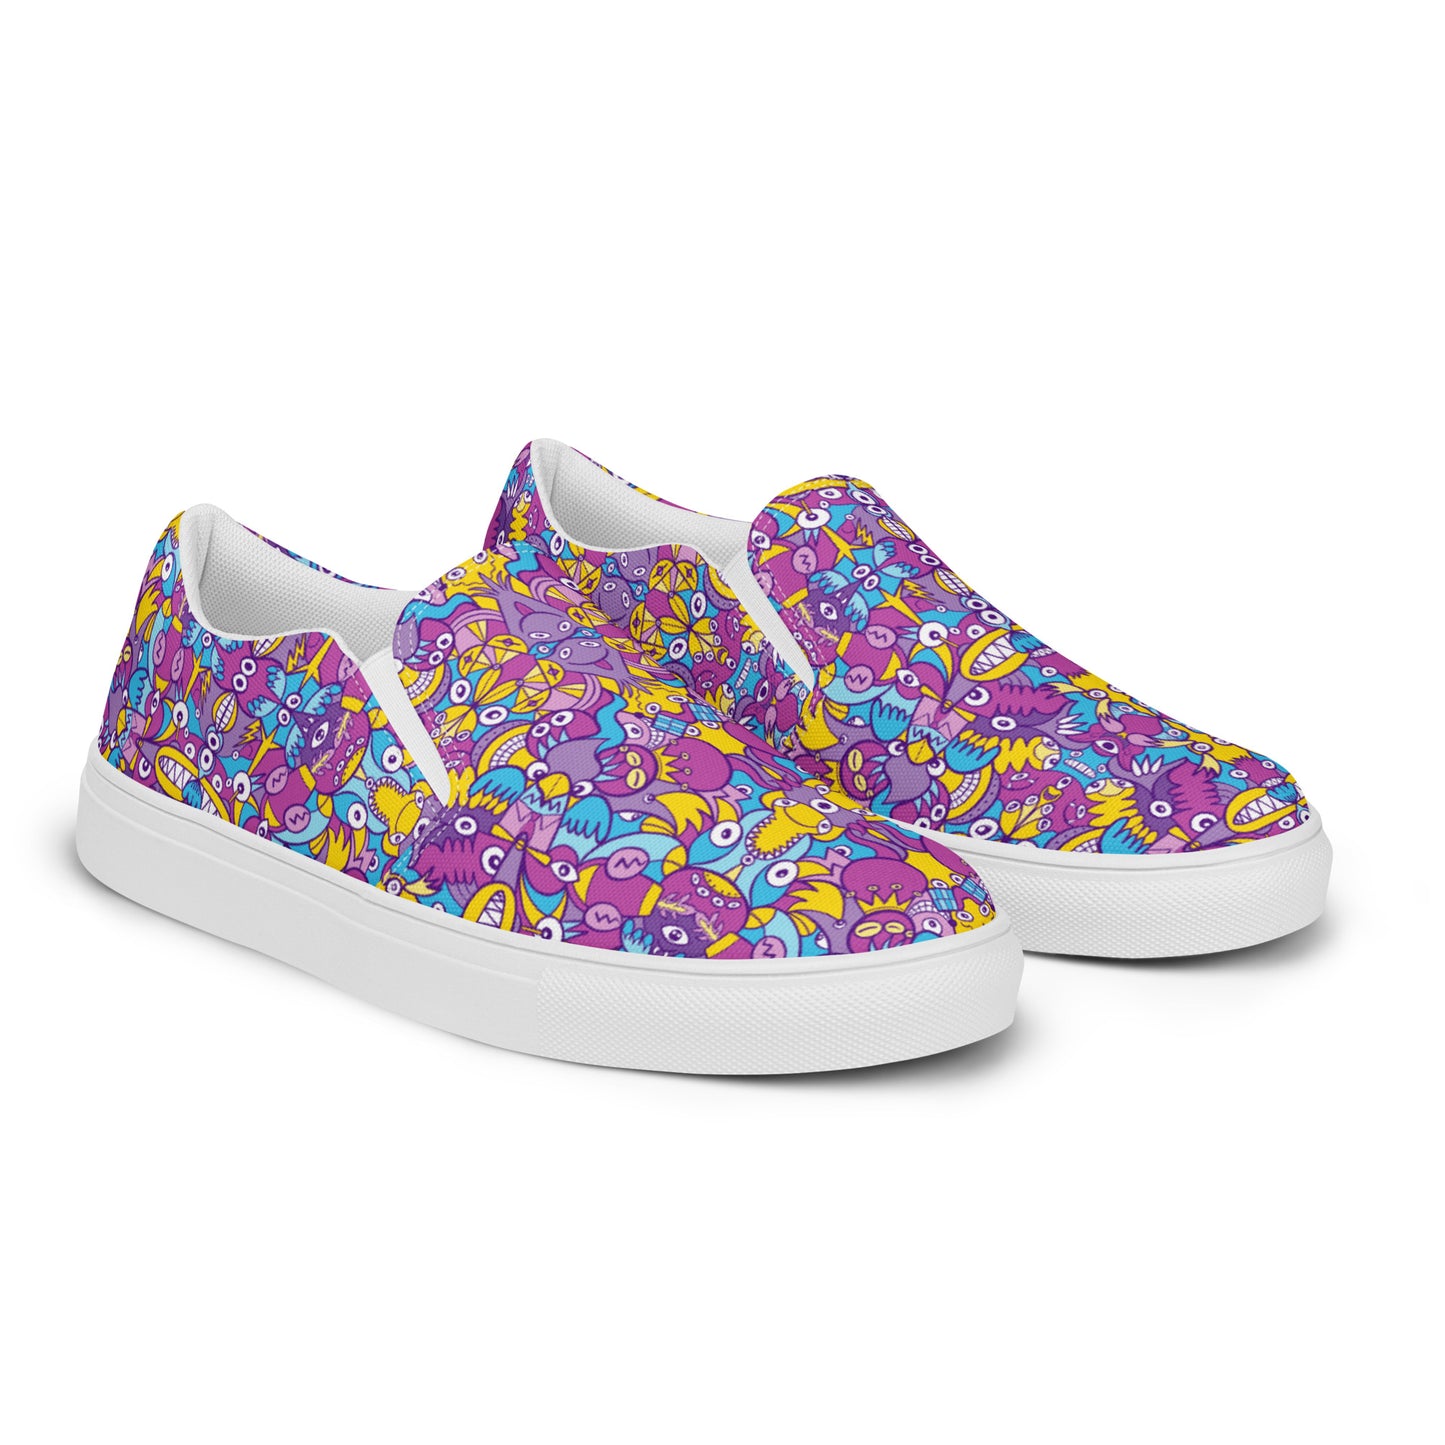 Doodle art compulsion is out of control Women’s slip-on canvas shoes. Overview